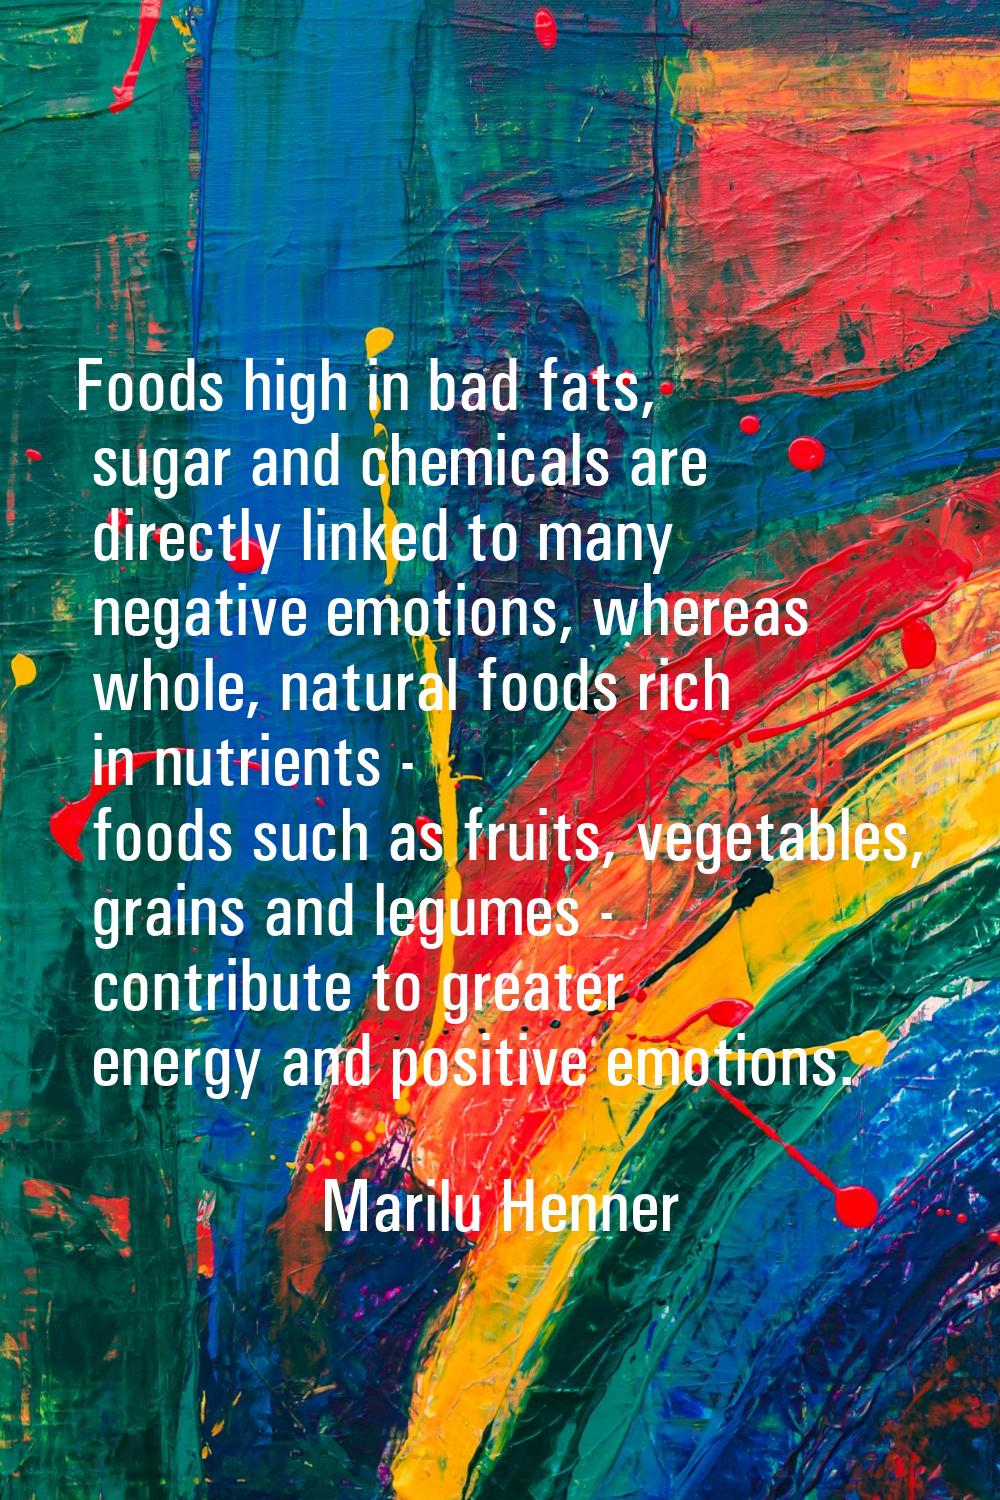 Foods high in bad fats, sugar and chemicals are directly linked to many negative emotions, whereas 